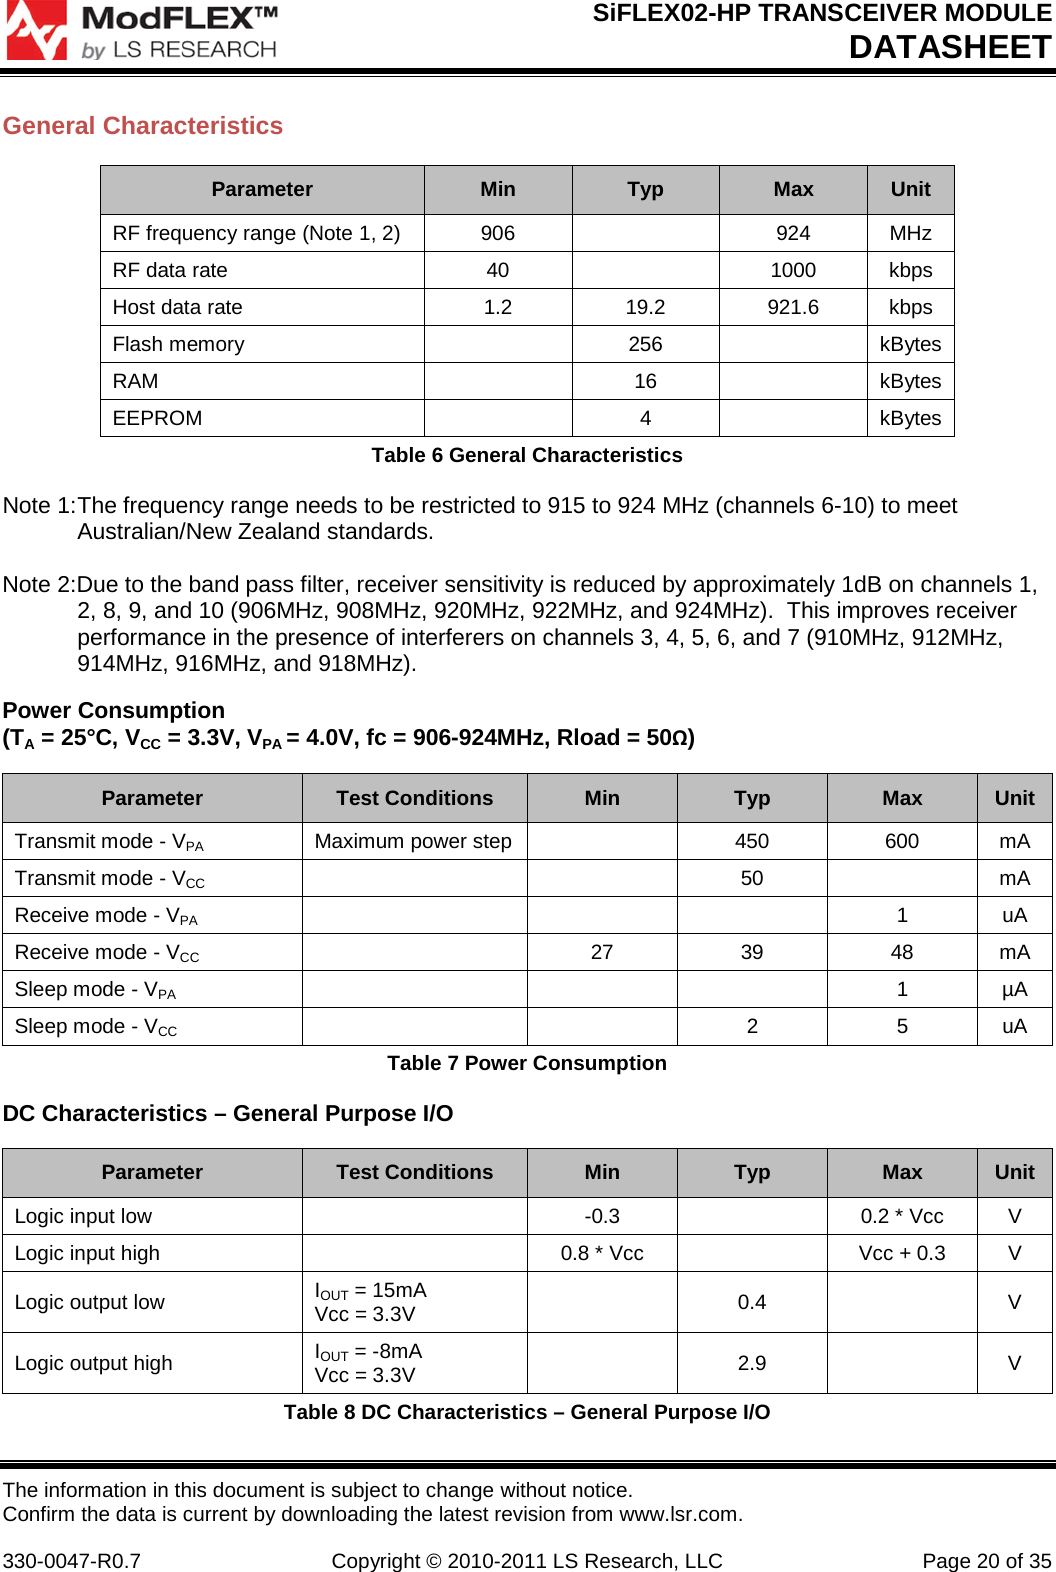 SiFLEX02-HP TRANSCEIVER MODULE DATASHEET The information in this document is subject to change without notice. Confirm the data is current by downloading the latest revision from www.lsr.com.  330-0047-R0.7  Copyright © 2010-2011 LS Research, LLC Page 20 of 35 General Characteristics Parameter Min Typ Max Unit RF frequency range (Note 1, 2) 906  924 MHz RF data rate 40  1000 kbps Host data rate 1.2 19.2 921.6 kbps Flash memory  256  kBytes RAM  16  kBytes EEPROM  4  kBytes Table 6 General Characteristics Note 1: The frequency range needs to be restricted to 915 to 924 MHz (channels 6-10) to meet Australian/New Zealand standards.    Note 2:Due to the band pass filter, receiver sensitivity is reduced by approximately 1dB on channels 1,  2, 8, 9, and 10 (906MHz, 908MHz, 920MHz, 922MHz, and 924MHz).  This improves receiver performance in the presence of interferers on channels 3, 4, 5, 6, and 7 (910MHz, 912MHz, 914MHz, 916MHz, and 918MHz). Power Consumption (TA = 25°C, VCC = 3.3V, VPA = 4.0V, fc = 906-924MHz, Rload = 50Ω) Parameter Test Conditions Min Typ Max Unit Transmit mode - VPA Maximum power step  450 600 mA Transmit mode - VCC   50  mA Receive mode - VPA    1 uA Receive mode - VCC  27 39 48 mA Sleep mode - VPA    1 µA Sleep mode - VCC   2 5 uA Table 7 Power Consumption DC Characteristics – General Purpose I/O Parameter Test Conditions Min Typ Max Unit Logic input low  -0.3  0.2 * Vcc V Logic input high  0.8 * Vcc  Vcc + 0.3 V Logic output low IOUT = 15mA Vcc = 3.3V  0.4    V Logic output high IOUT = -8mA Vcc = 3.3V  2.9    V Table 8 DC Characteristics – General Purpose I/O 